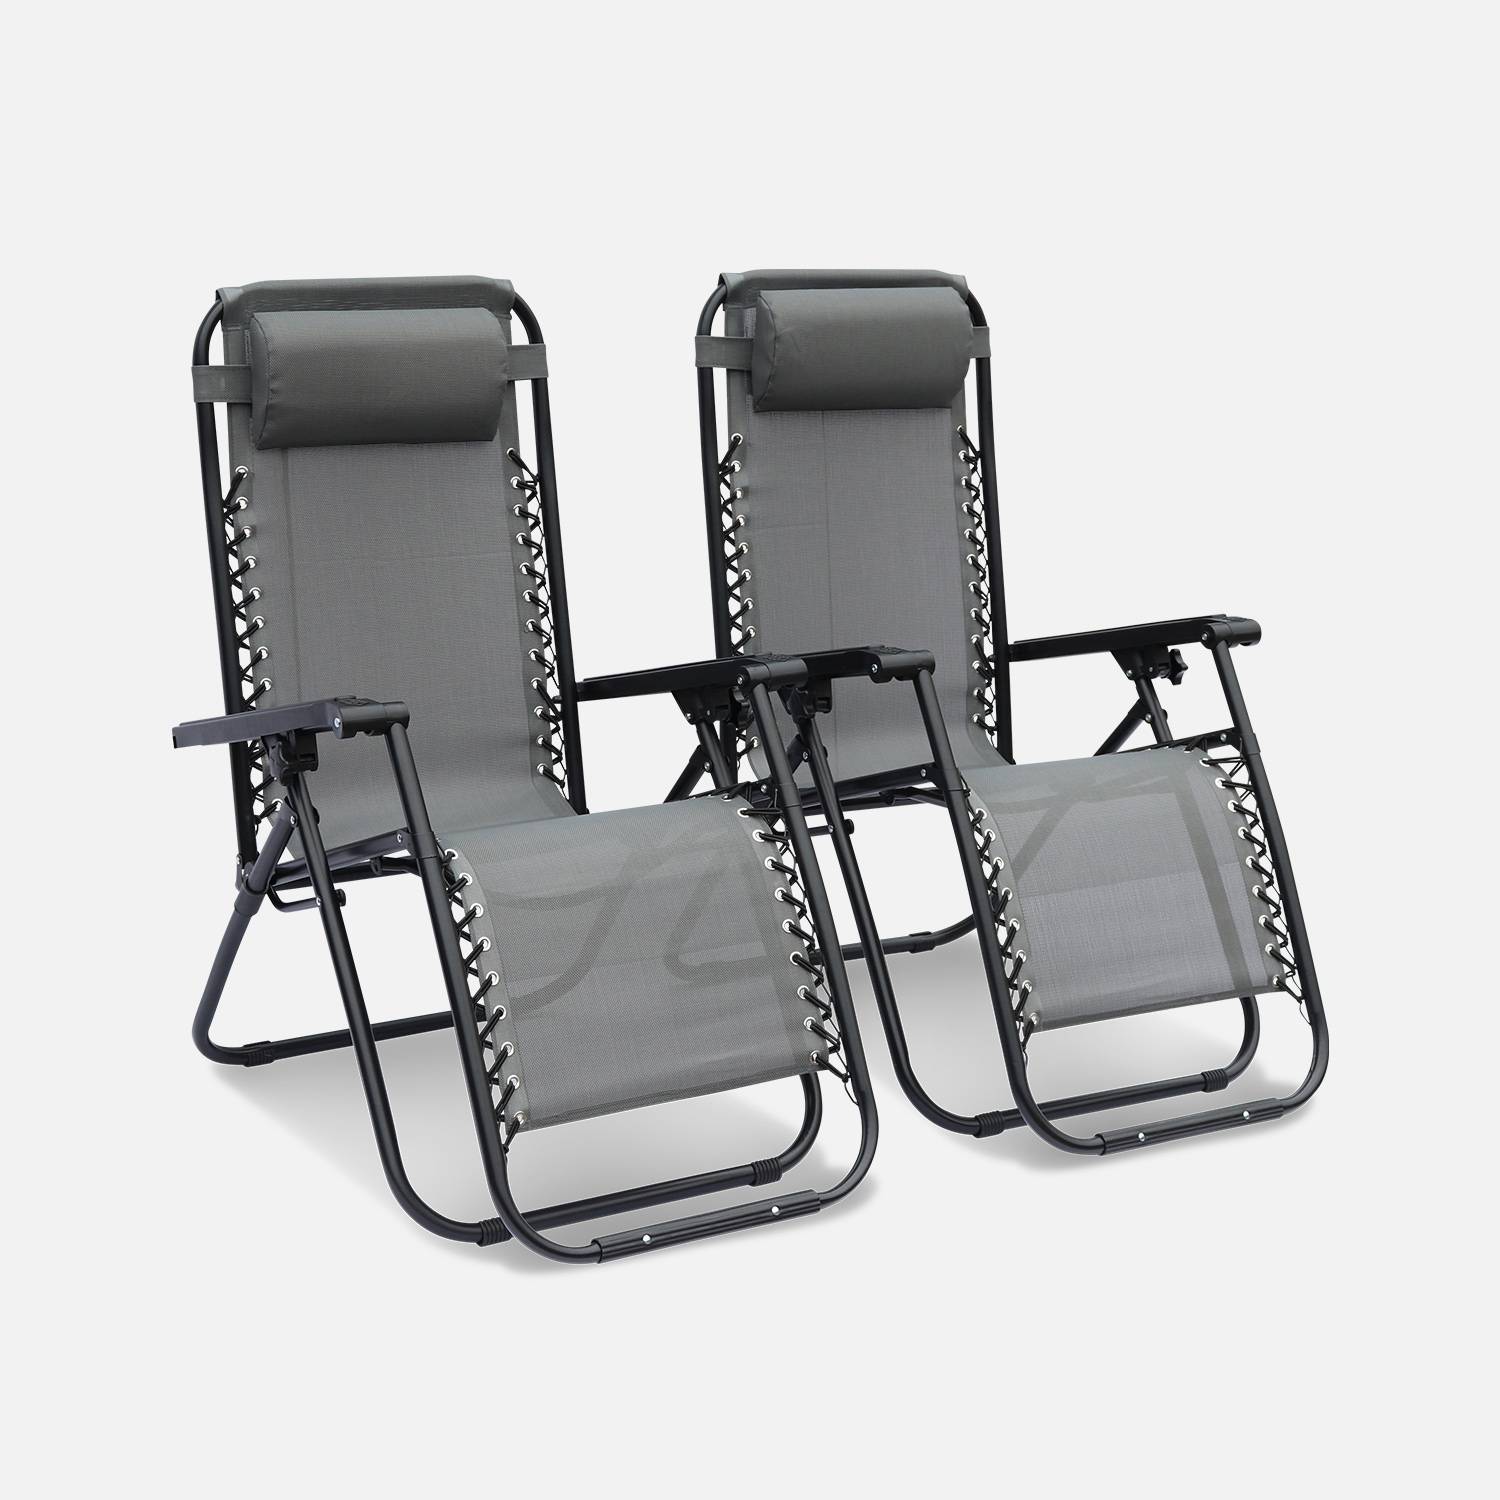 2 textilene reclining chairs - foldable, multi-position - Patrick - Anthracite Photo3